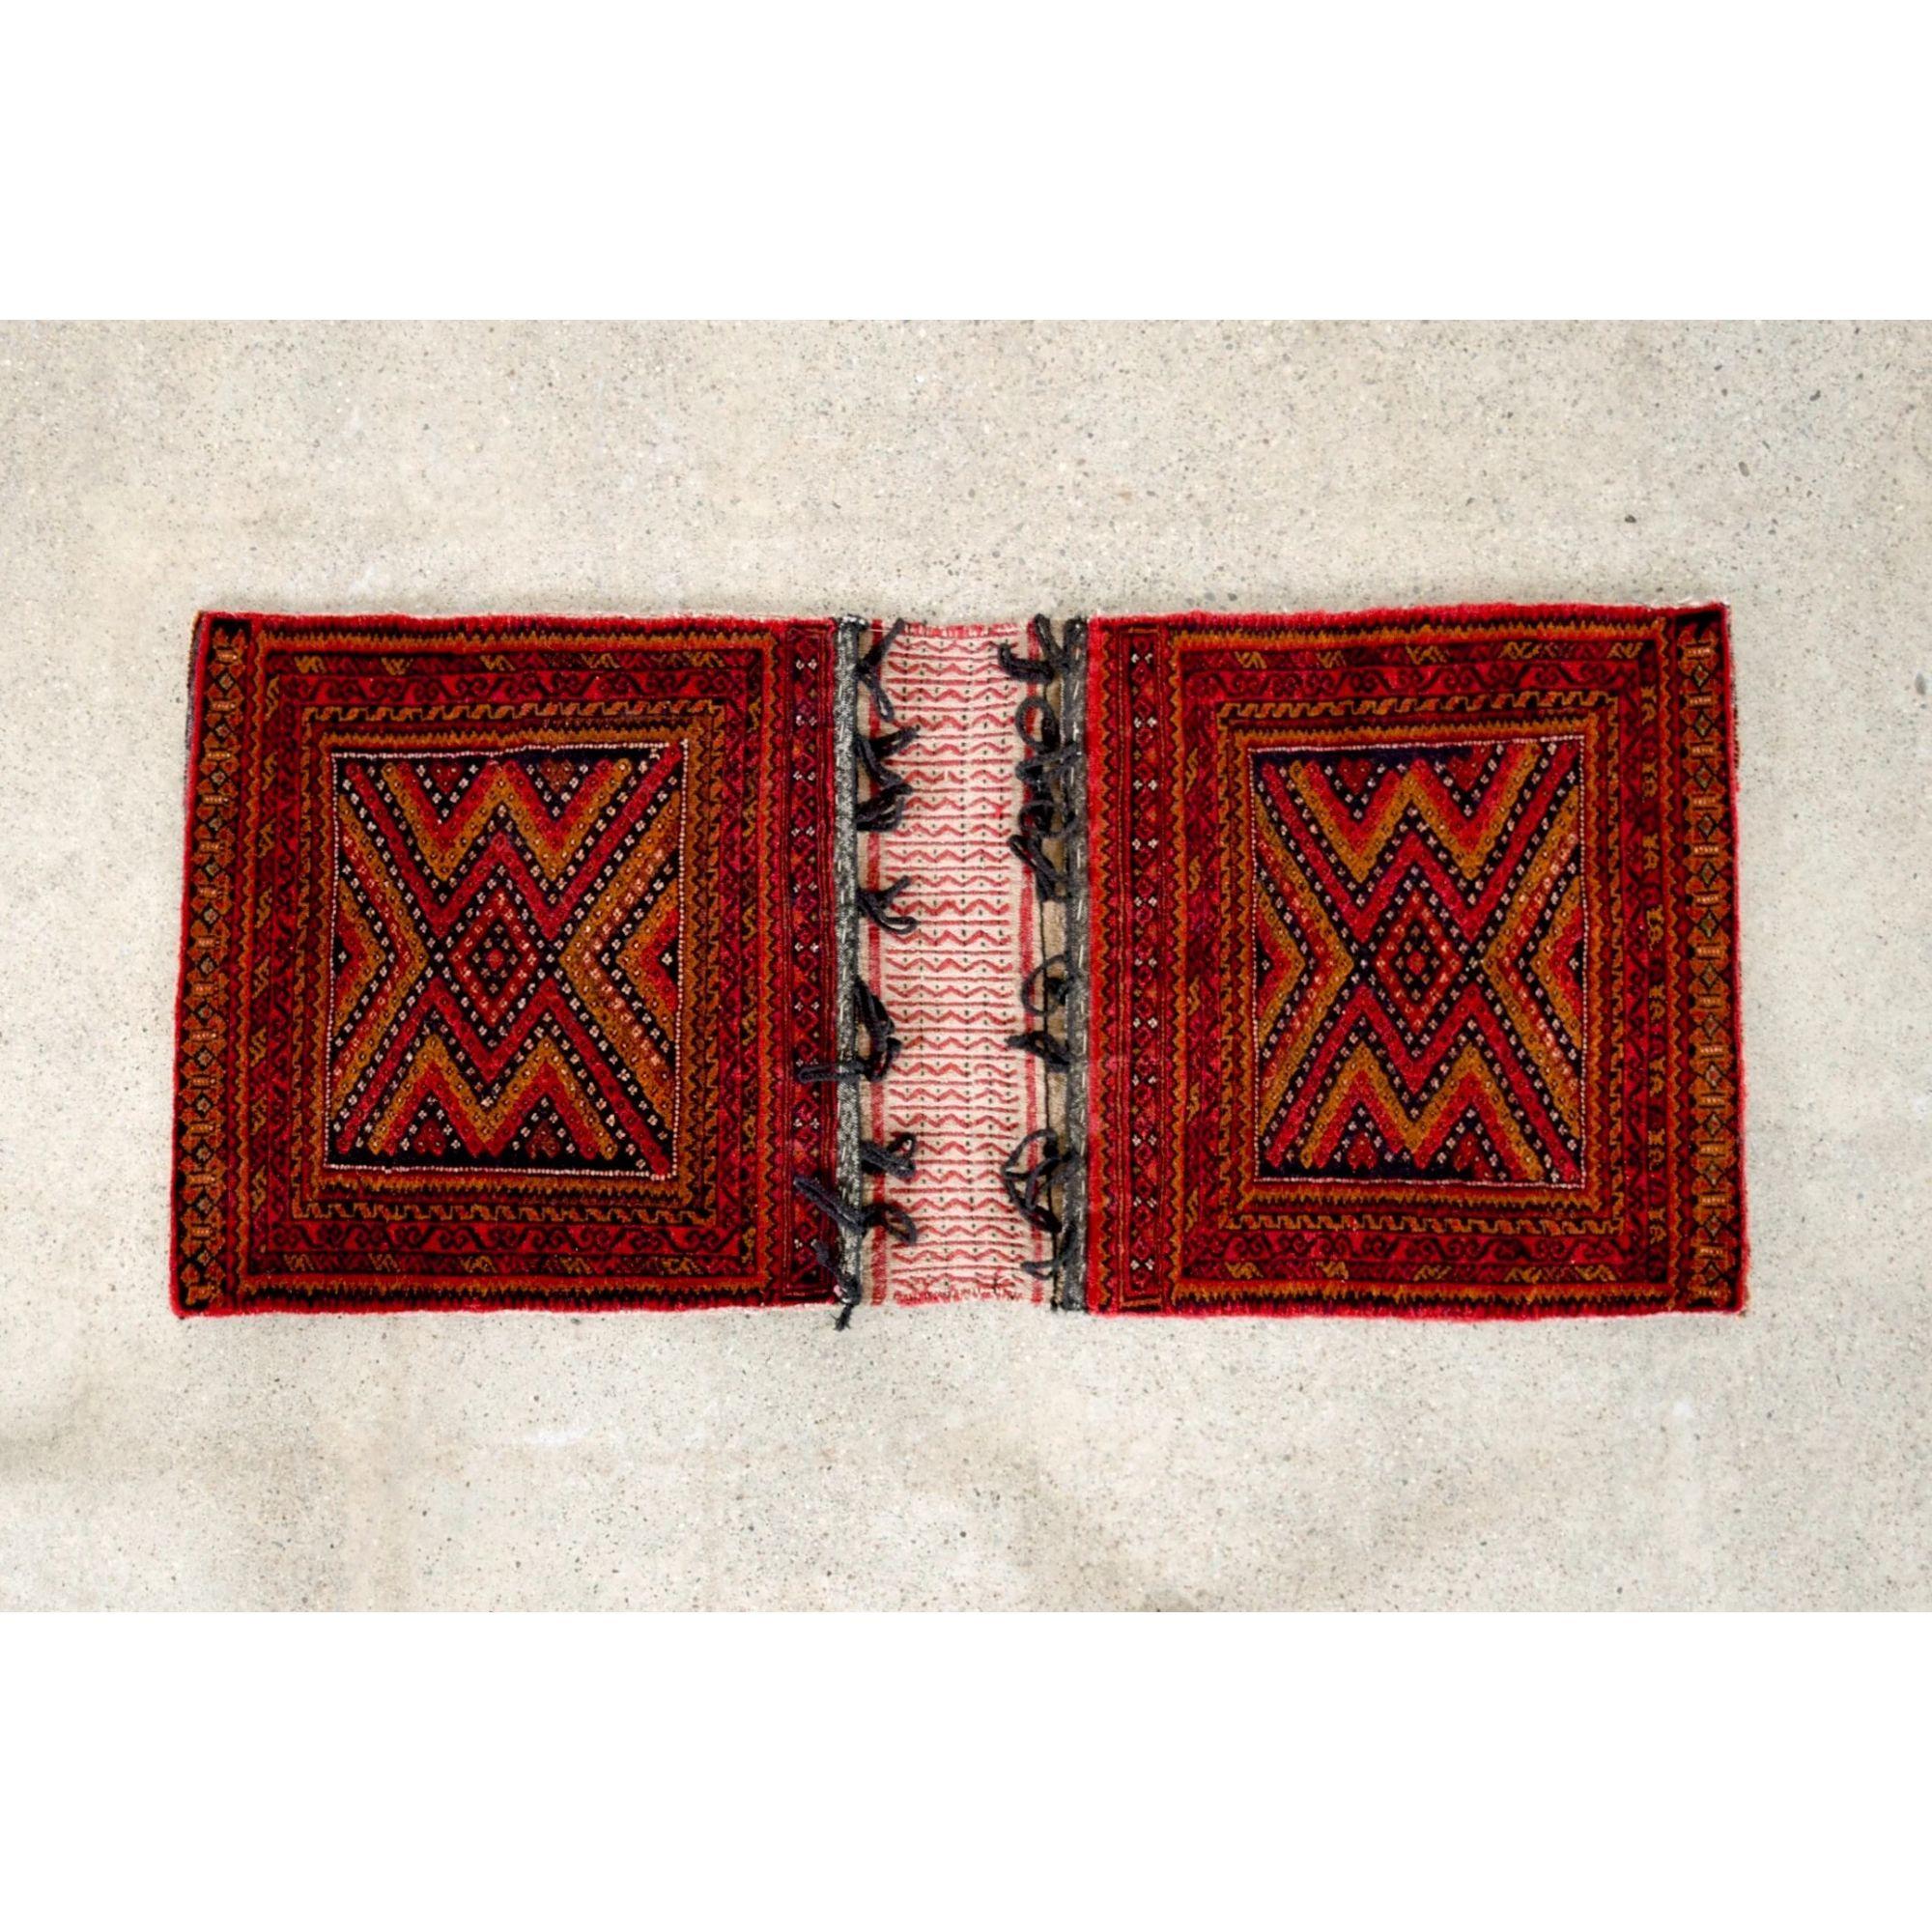 This authentic vintage Baluch tribal saddlebag rug is from a region near present-day Afghanistan and Pakistan. This small expertly handcrafted rug is connected by flat woven kilim with suspension loops and features an intricate geometric tribal